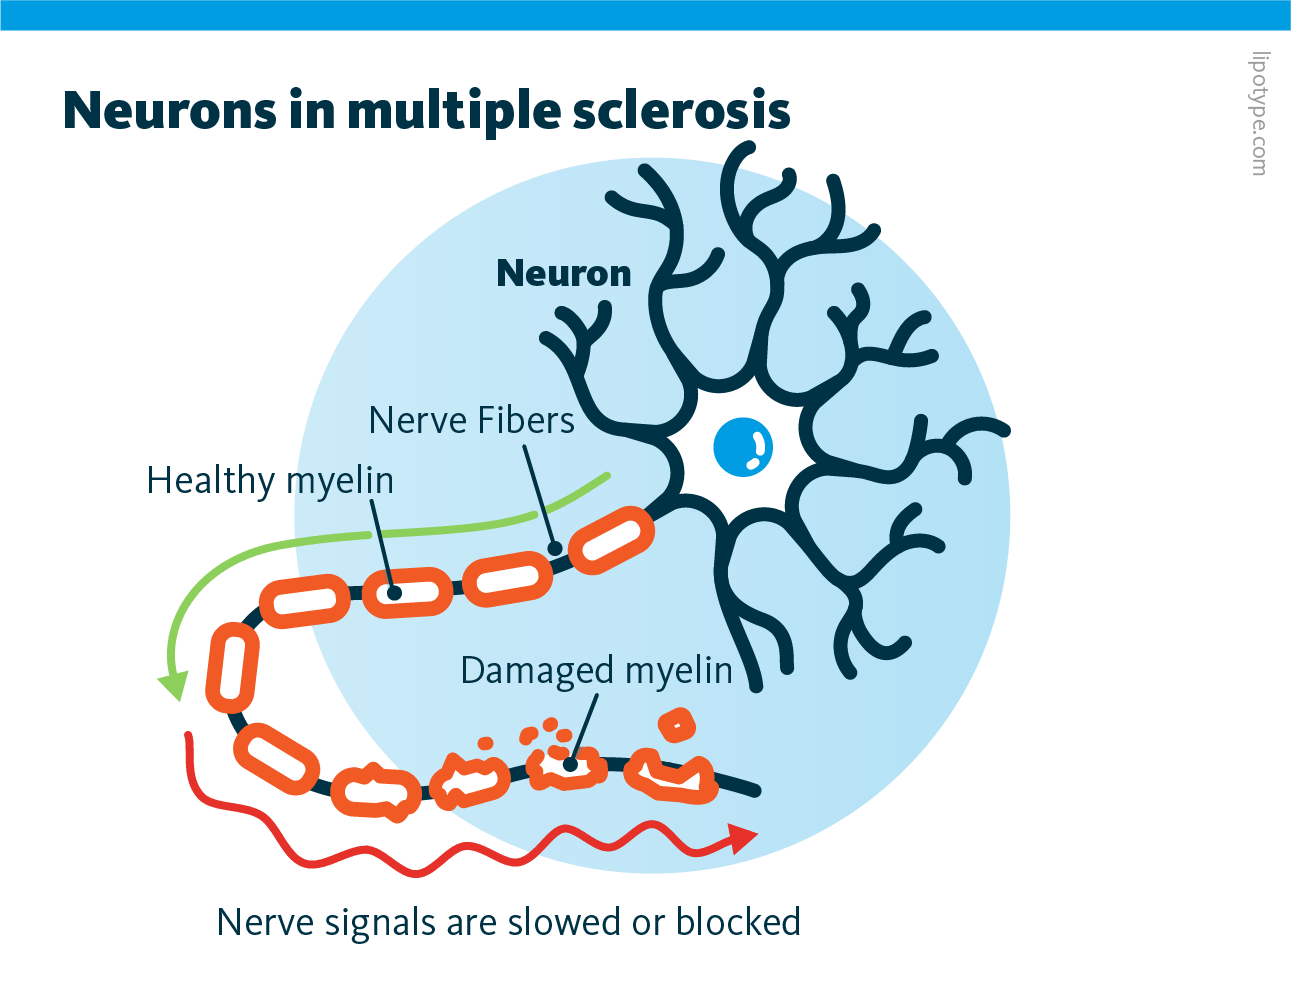 An infographic showing how neurons and their myelin sheaths are affected by multiple sclerosis, a chronic inflammatory and neurodegenerative disease of the central nervous system.